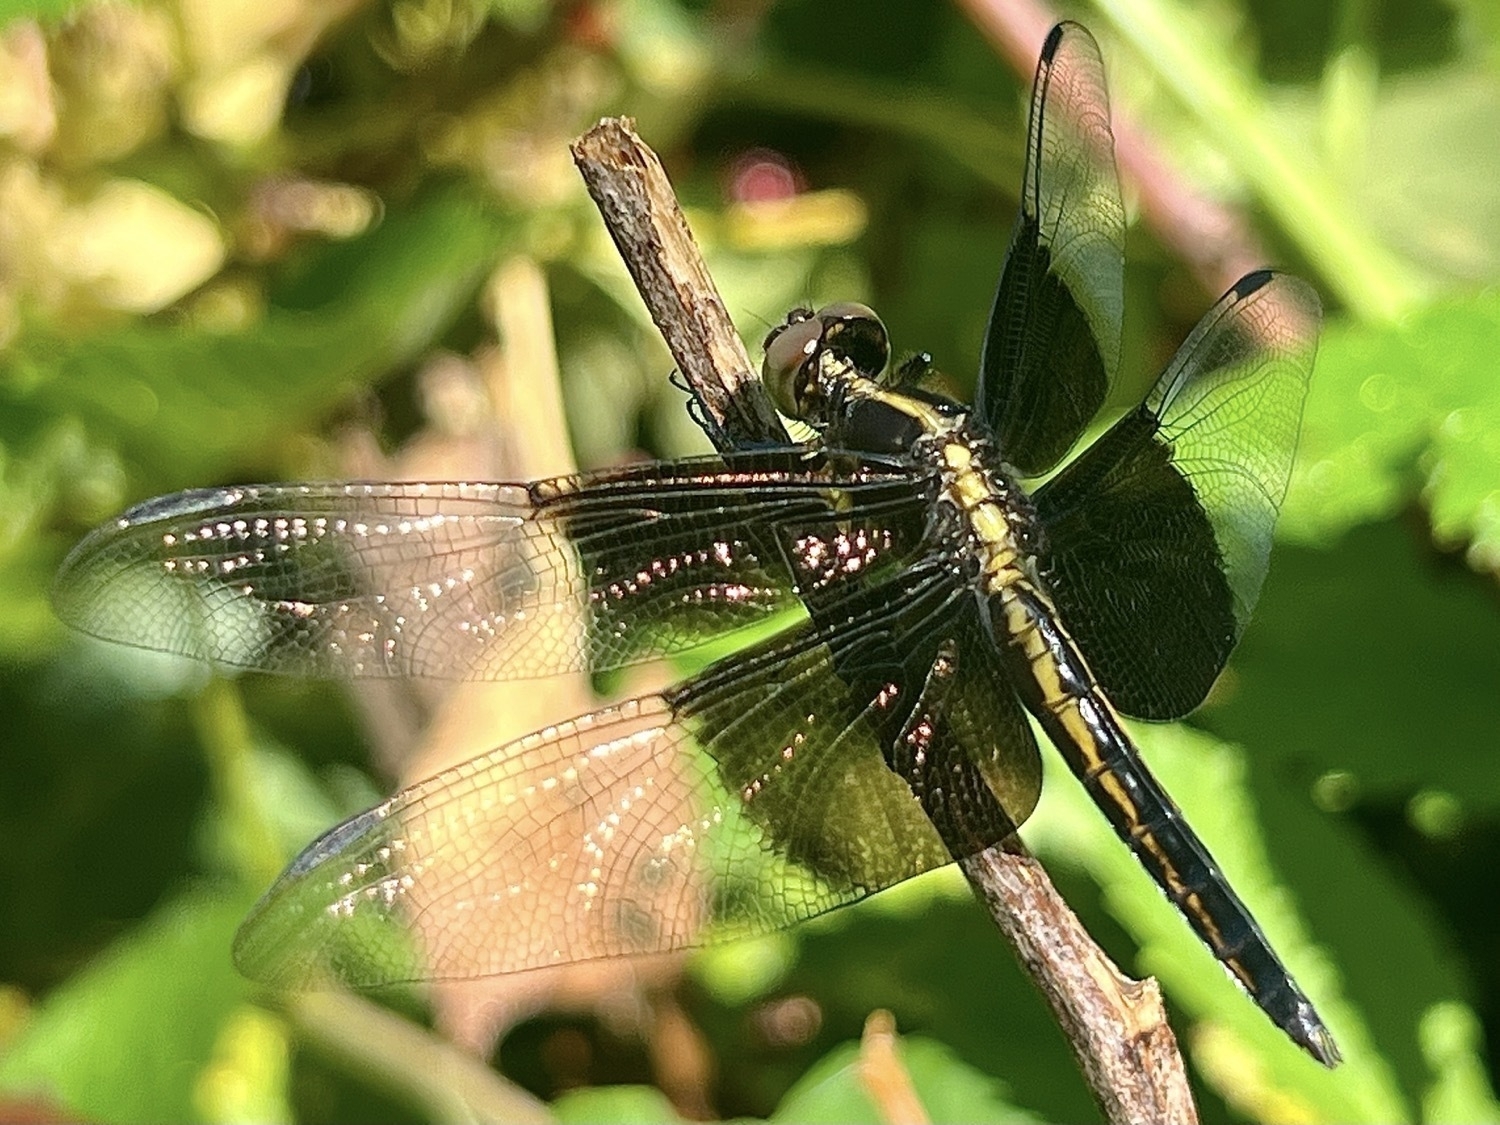 A black and yellow dragonfly perched on a plant branch and photographed from behind showing the side. The four wings are translucent but half of each wing is black at the point they attach to the body.